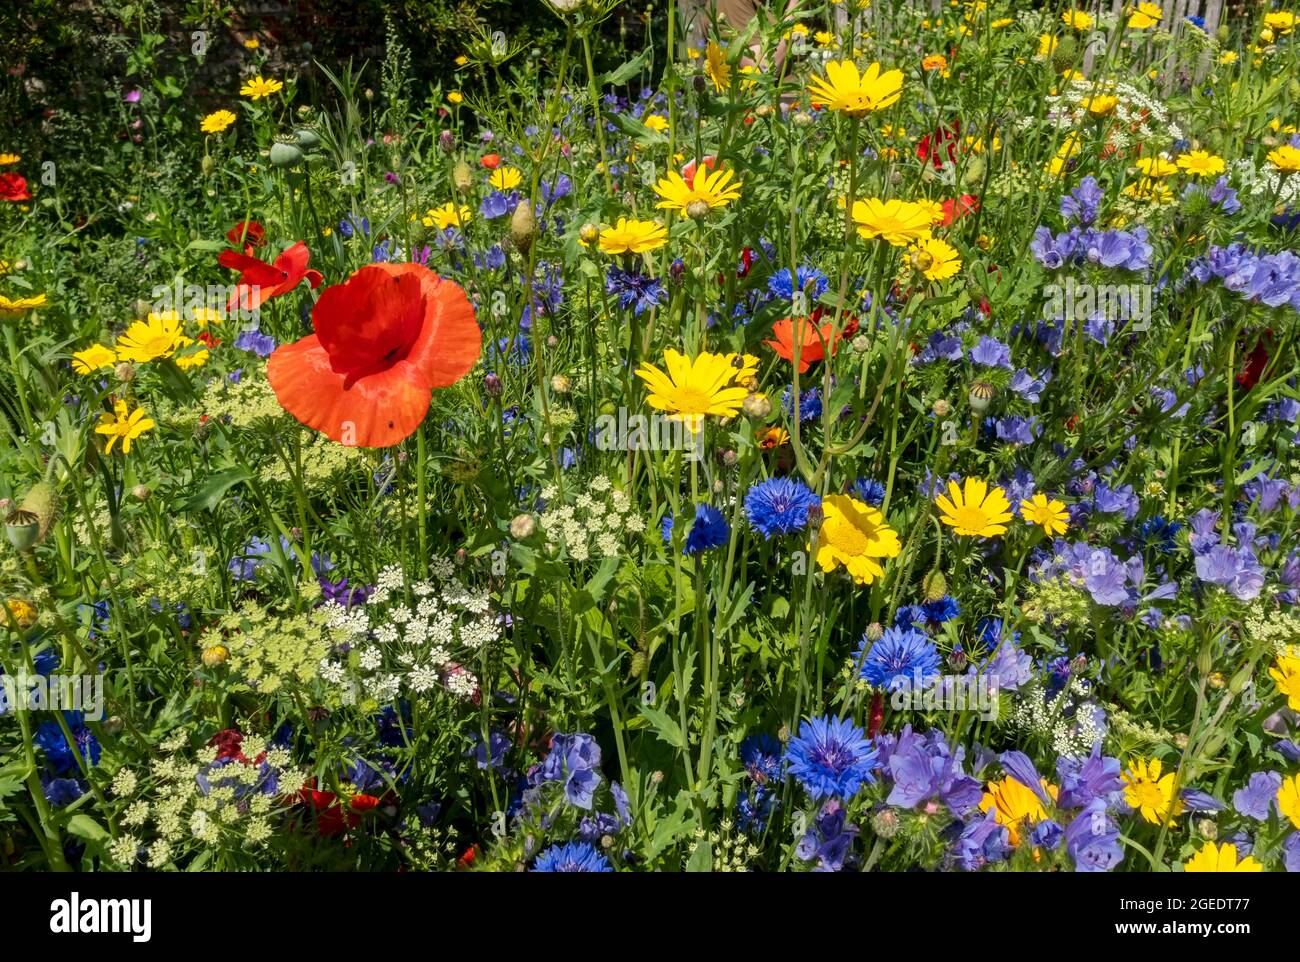 Close up of red poppies yellow corn marigolds and blue cornflowers wildflowers wild flowers in a garden border in summer England UK United Kingdom Stock Photo